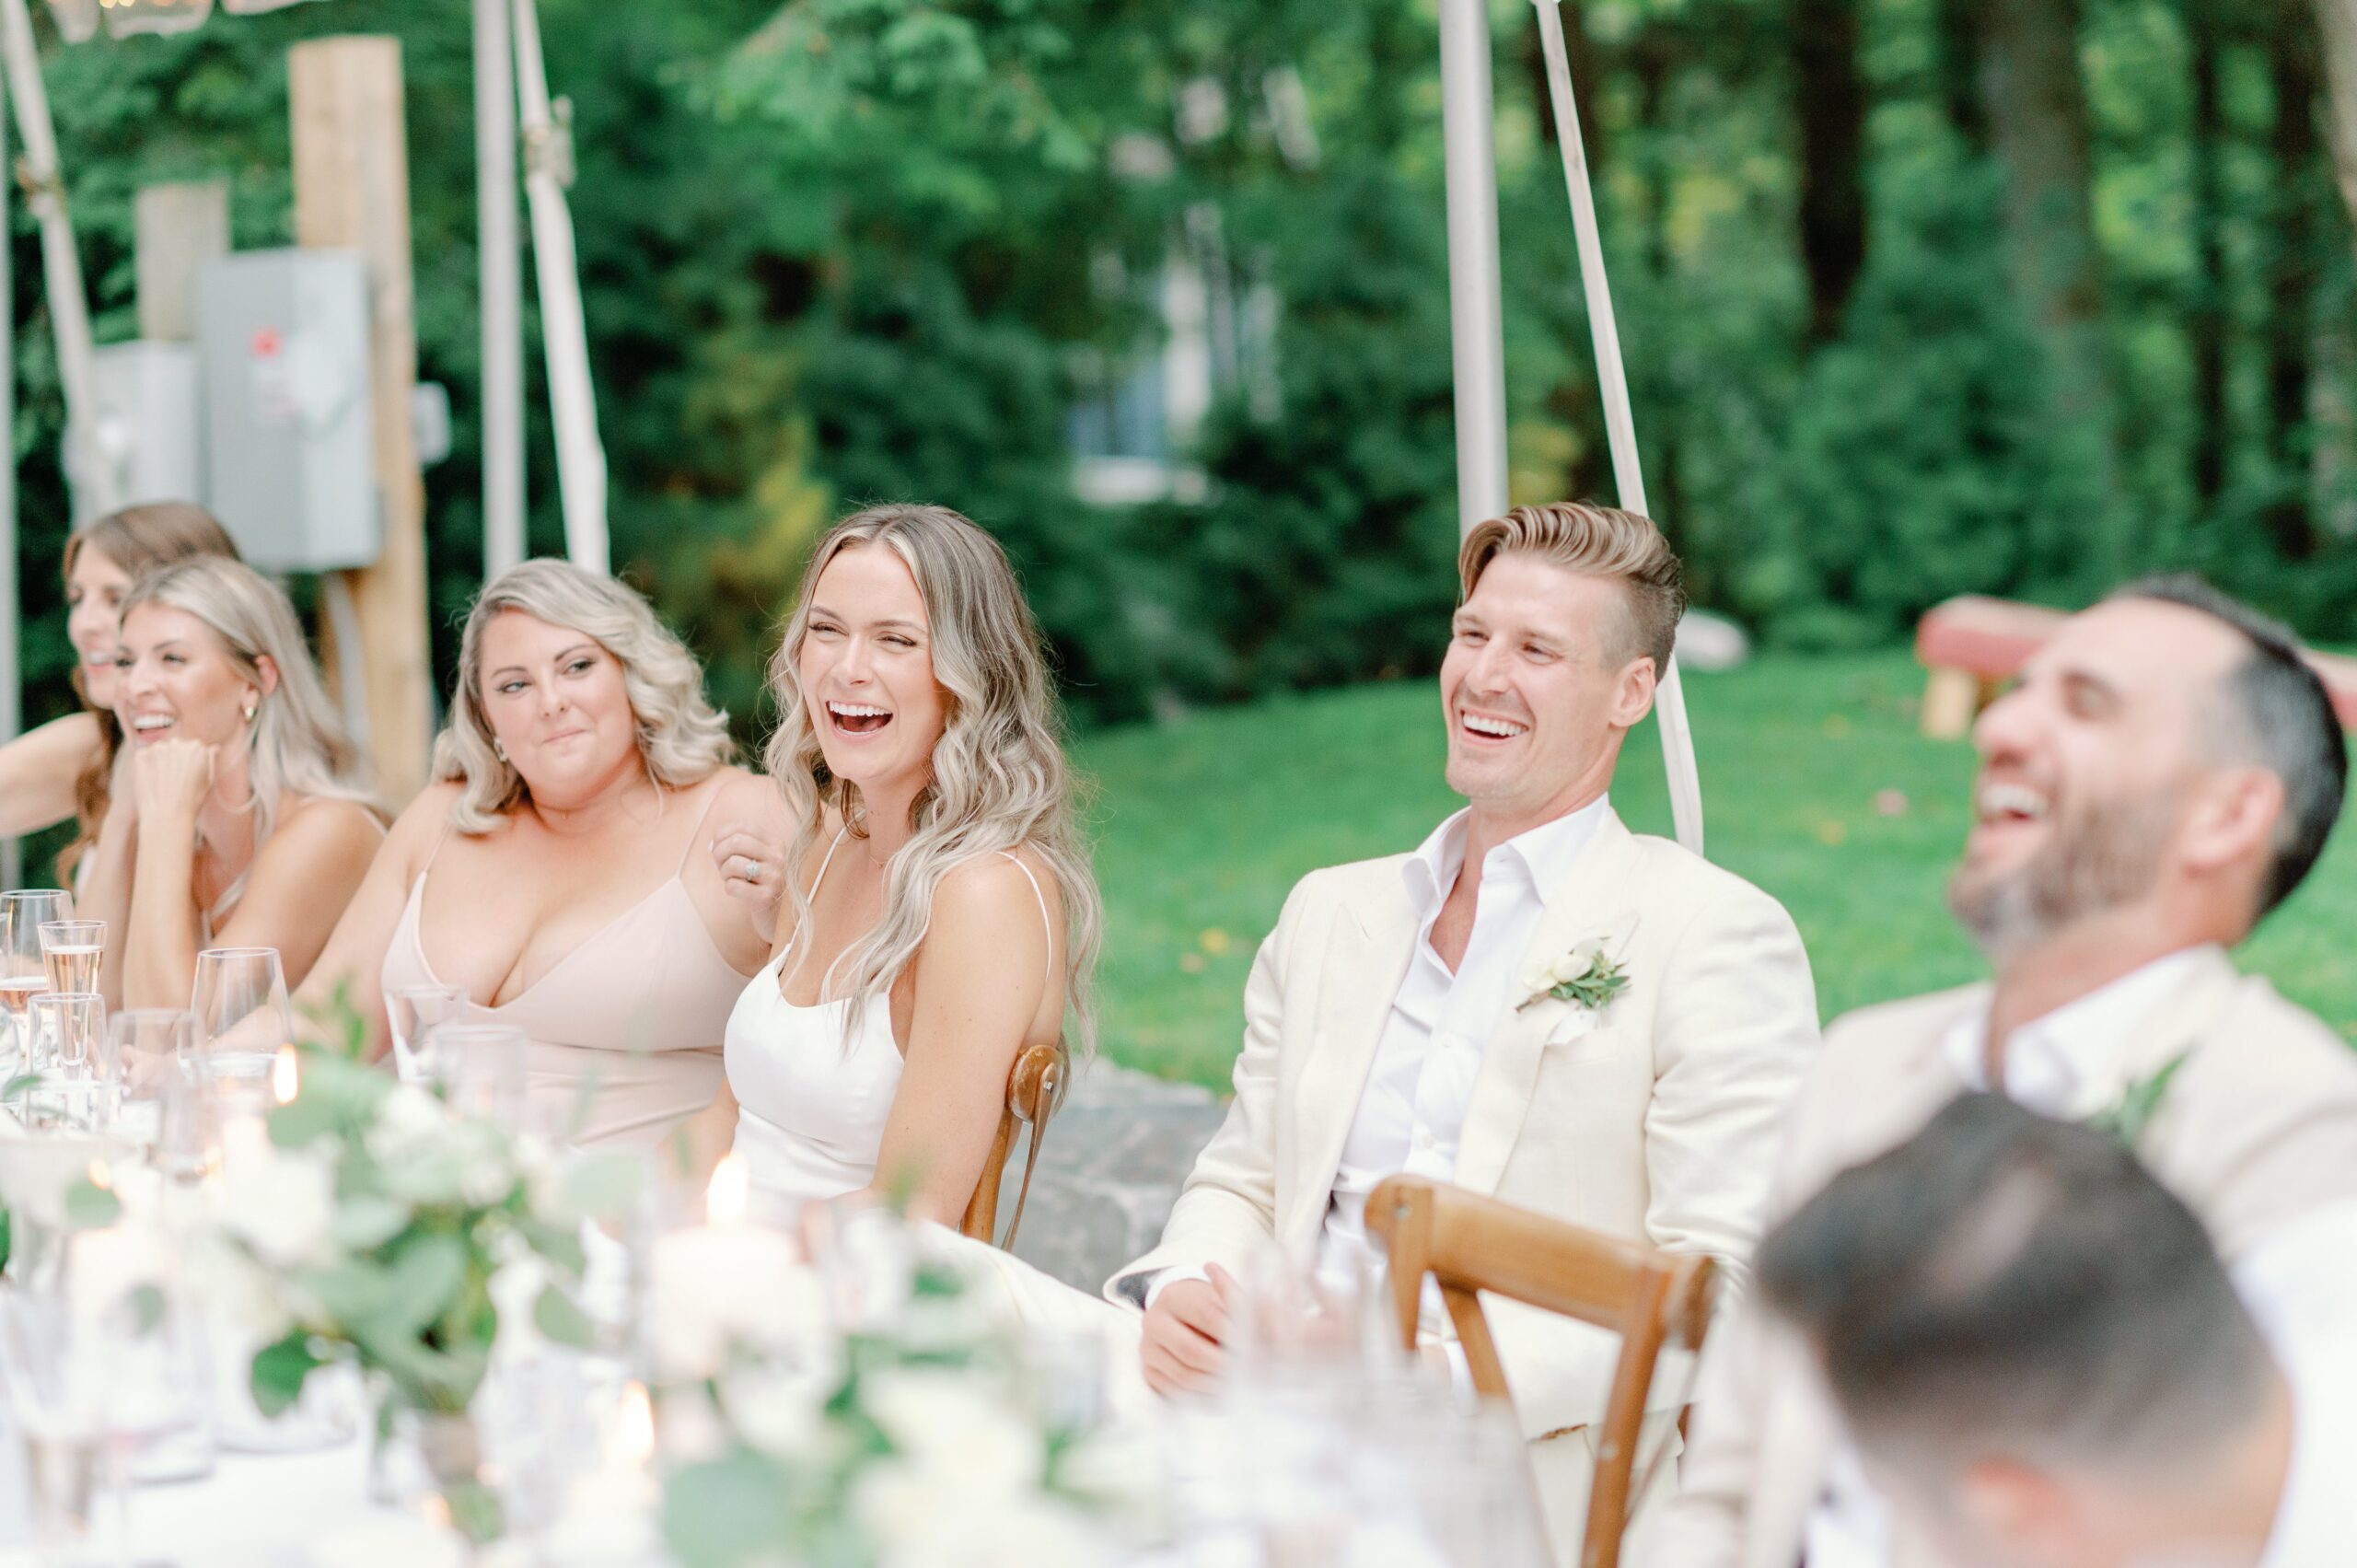 Candid moment of head table laughing at outdoor wedding reception.